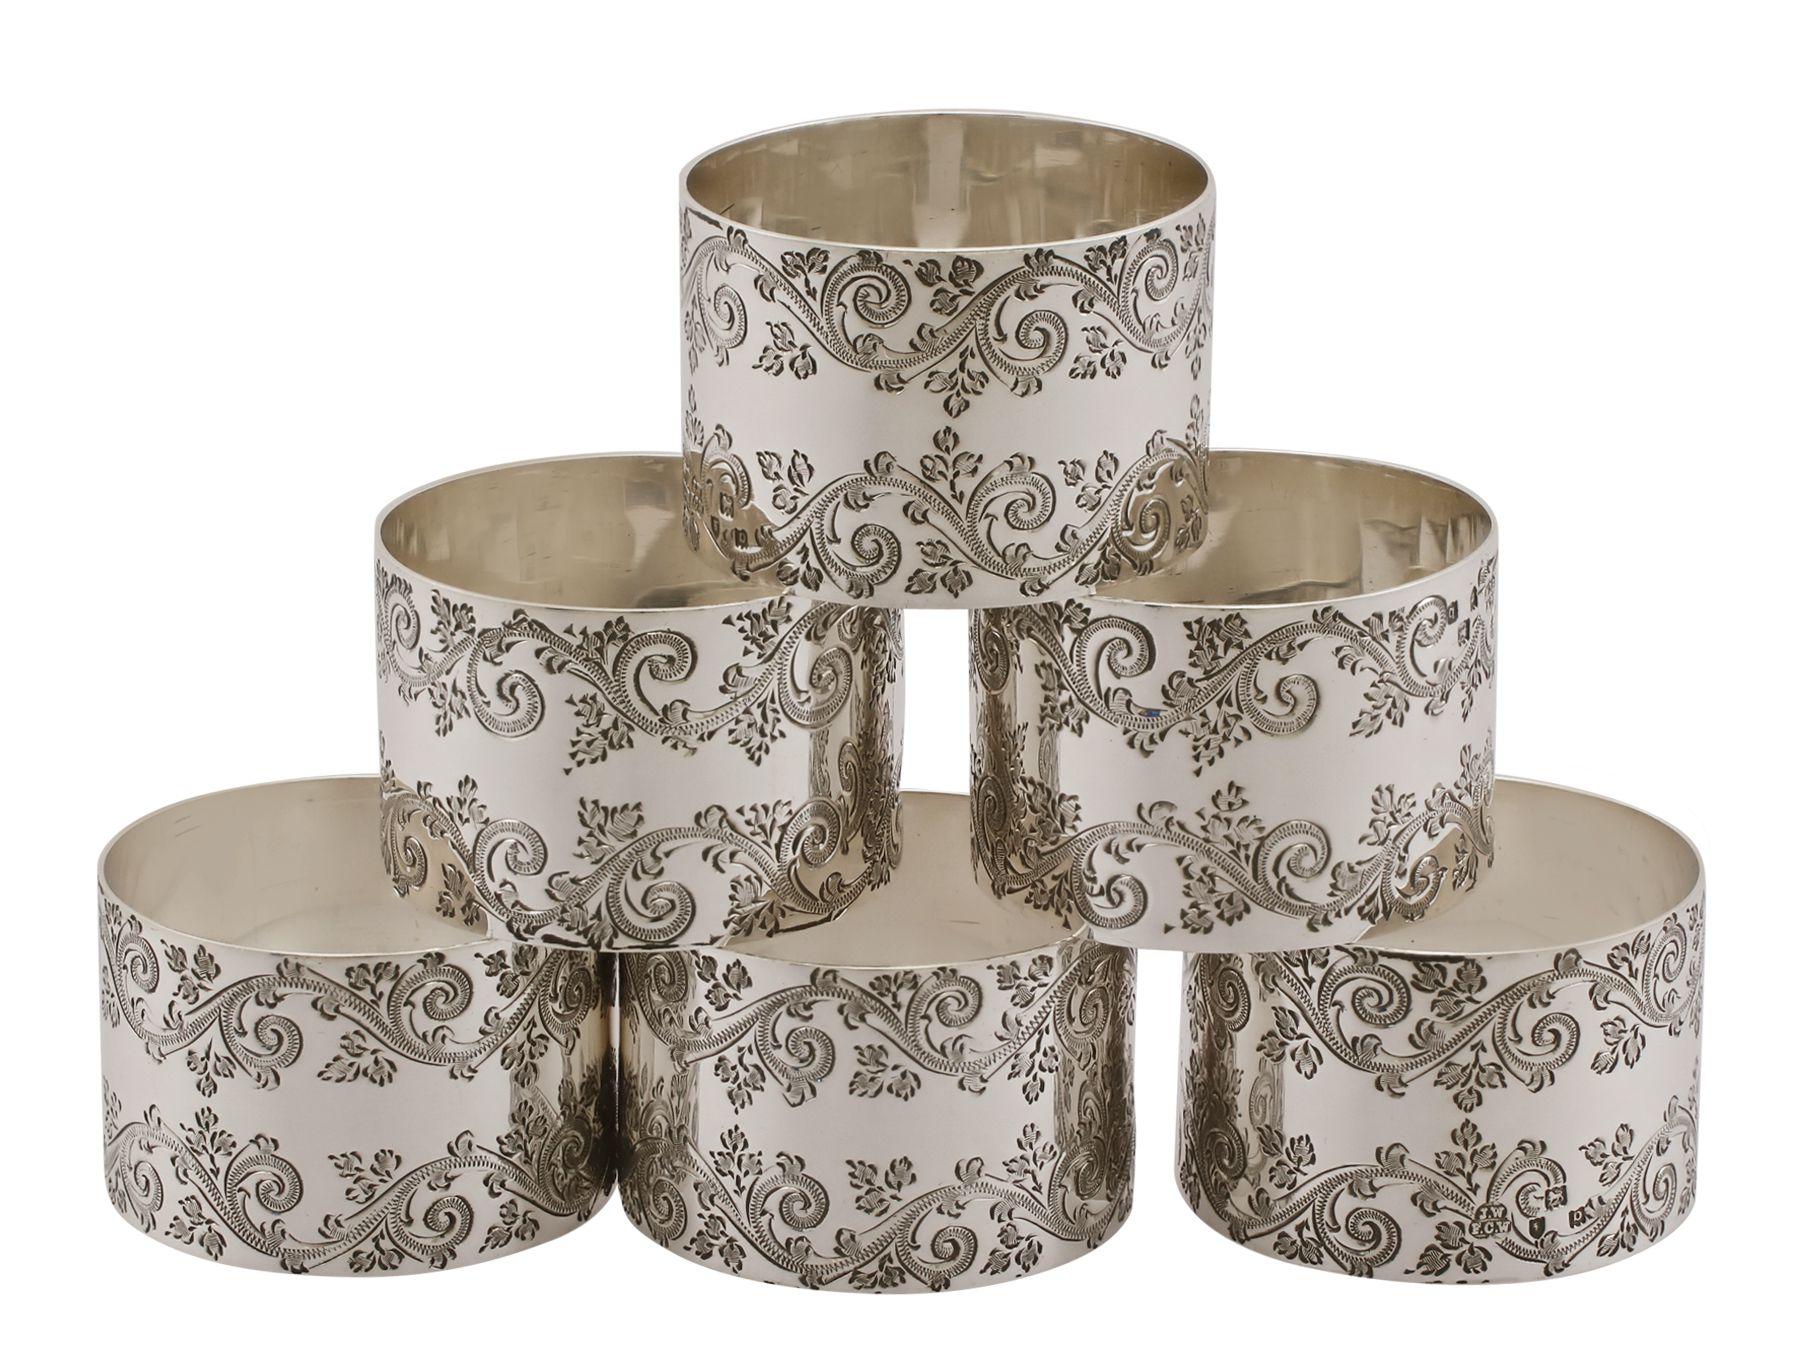 British Antique Victorian Sterling Silver Numbered Napkin Rings Set of Six 1897